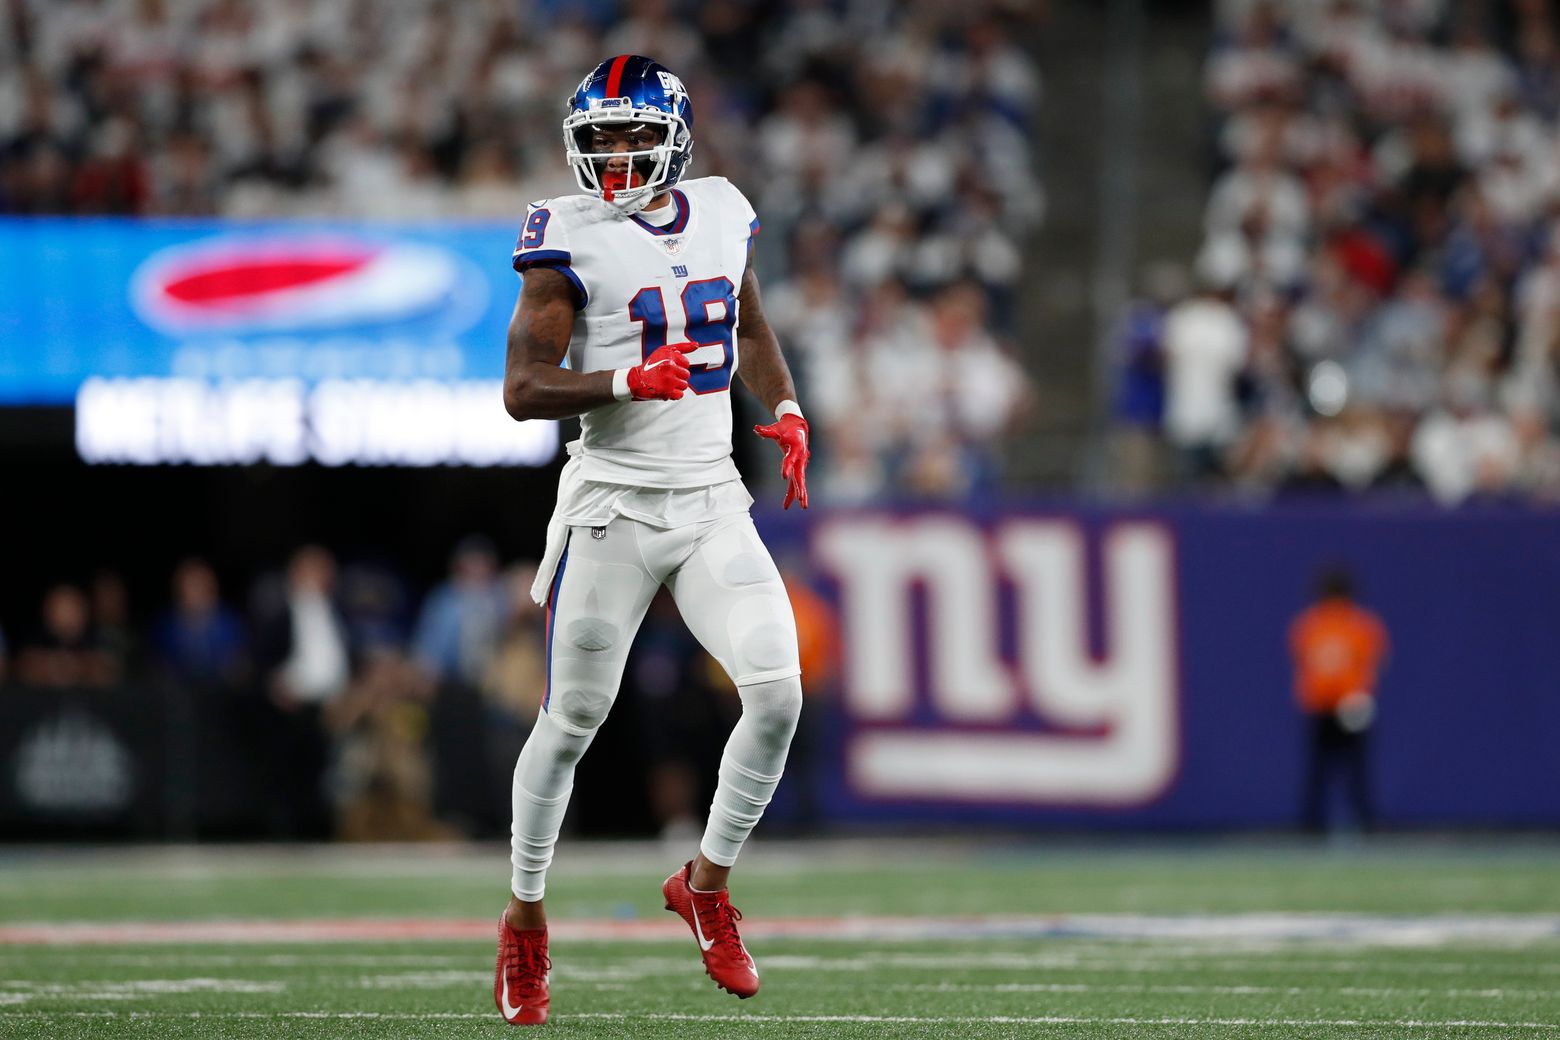 Giants' Kenny Golladay likely to return against Texans